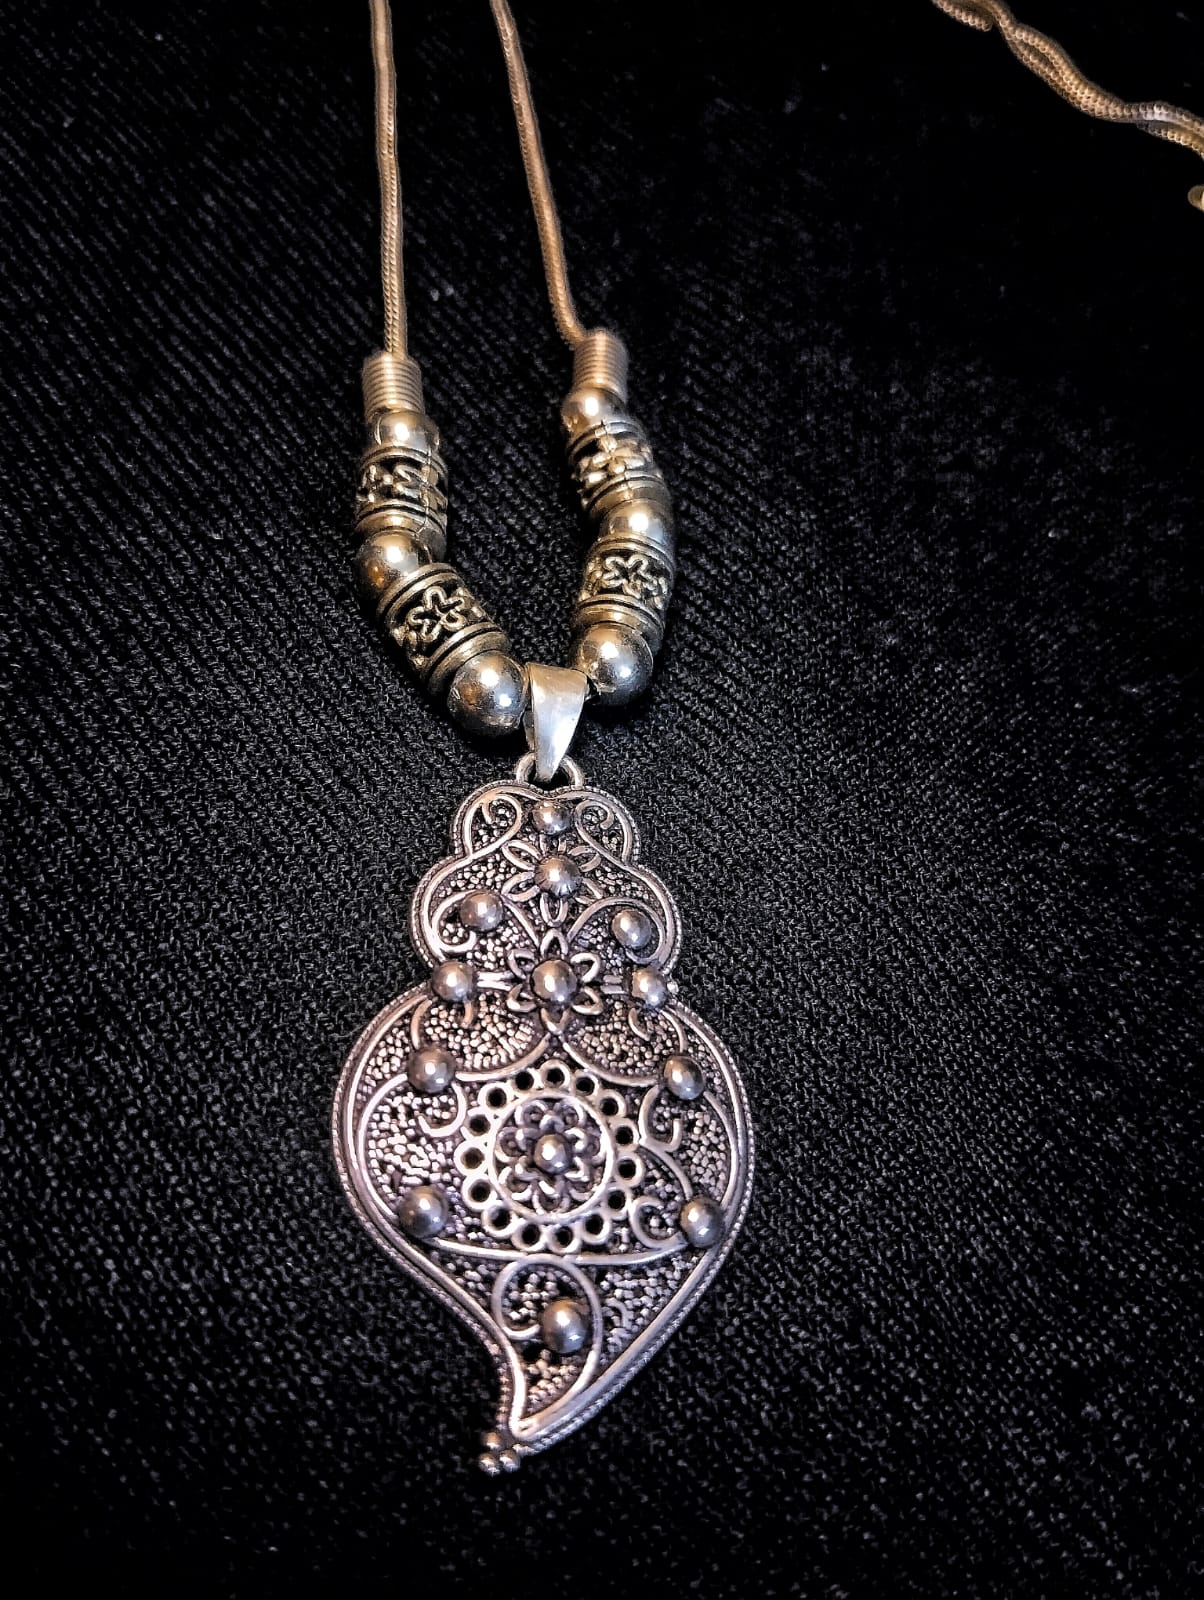 Close-up view of the intricate Filigree-Shaped Oxidized Silver Pendant, showcasing detailed filigree work and vintage silver finish.